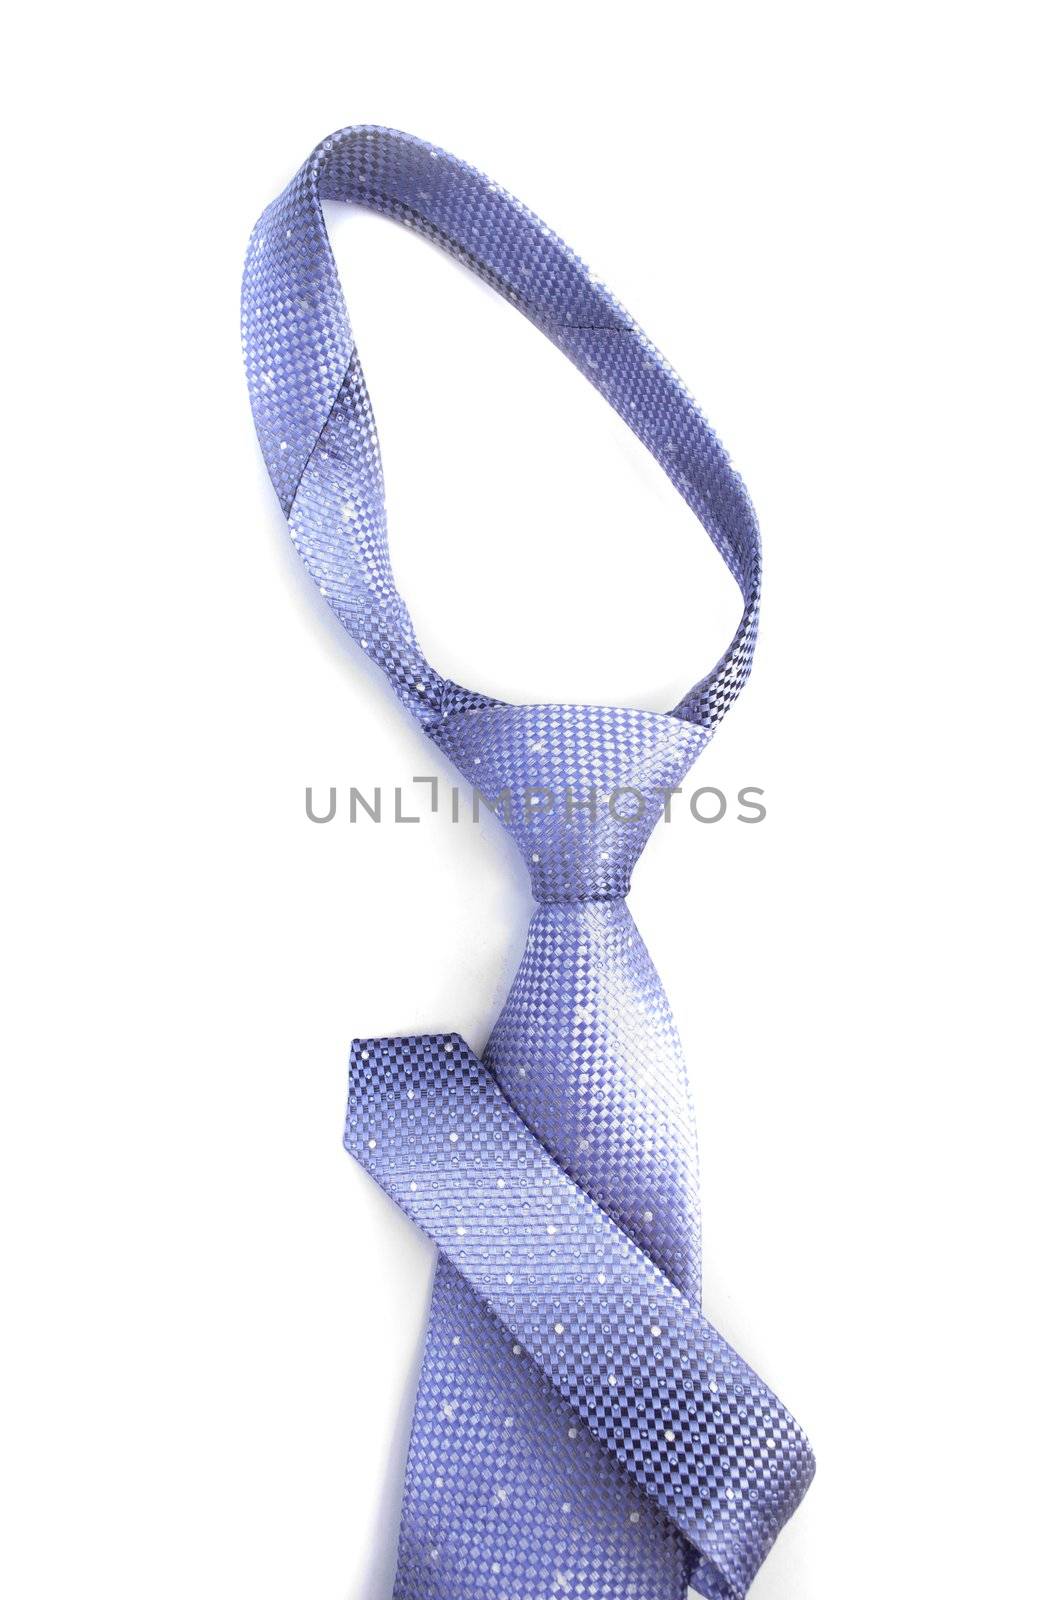 fragment of a tie on a white background by Triphka